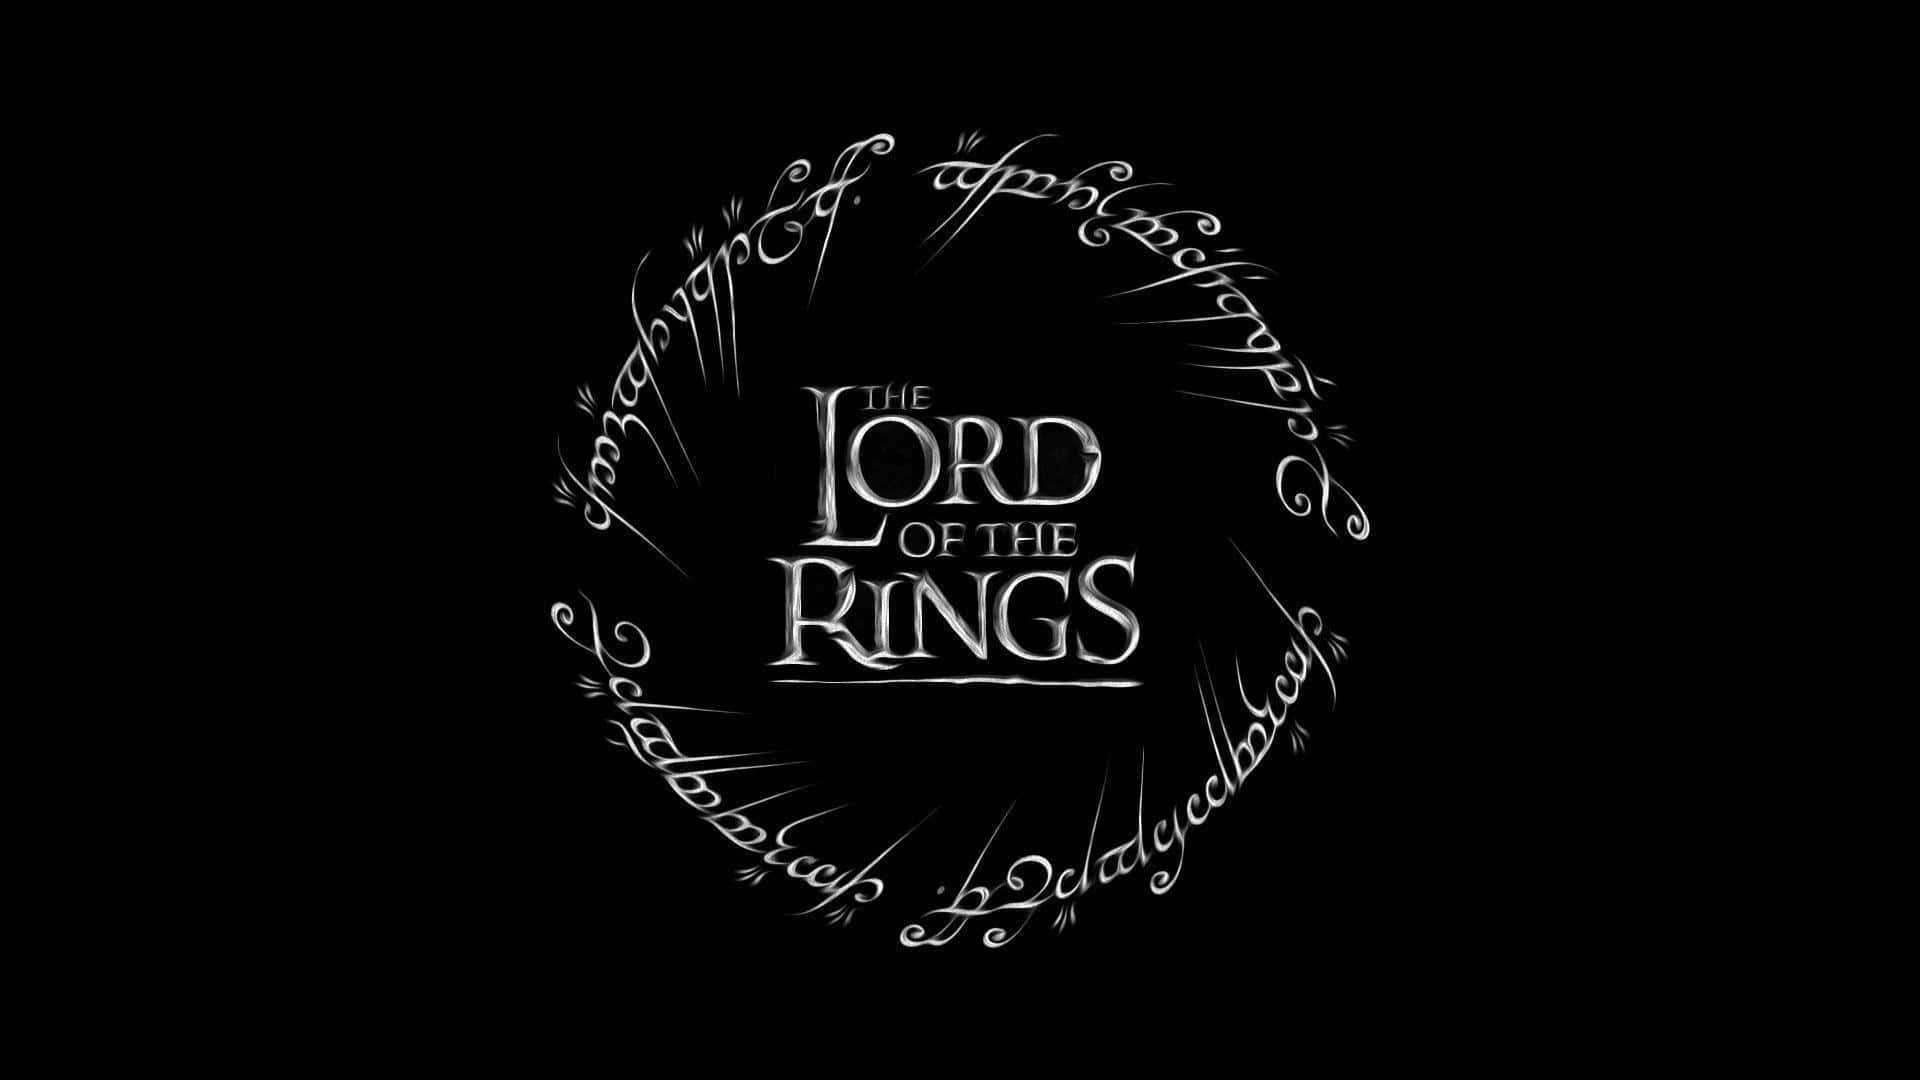 100+] 4k Lord Of The Rings Wallpapers | Wallpapers.com